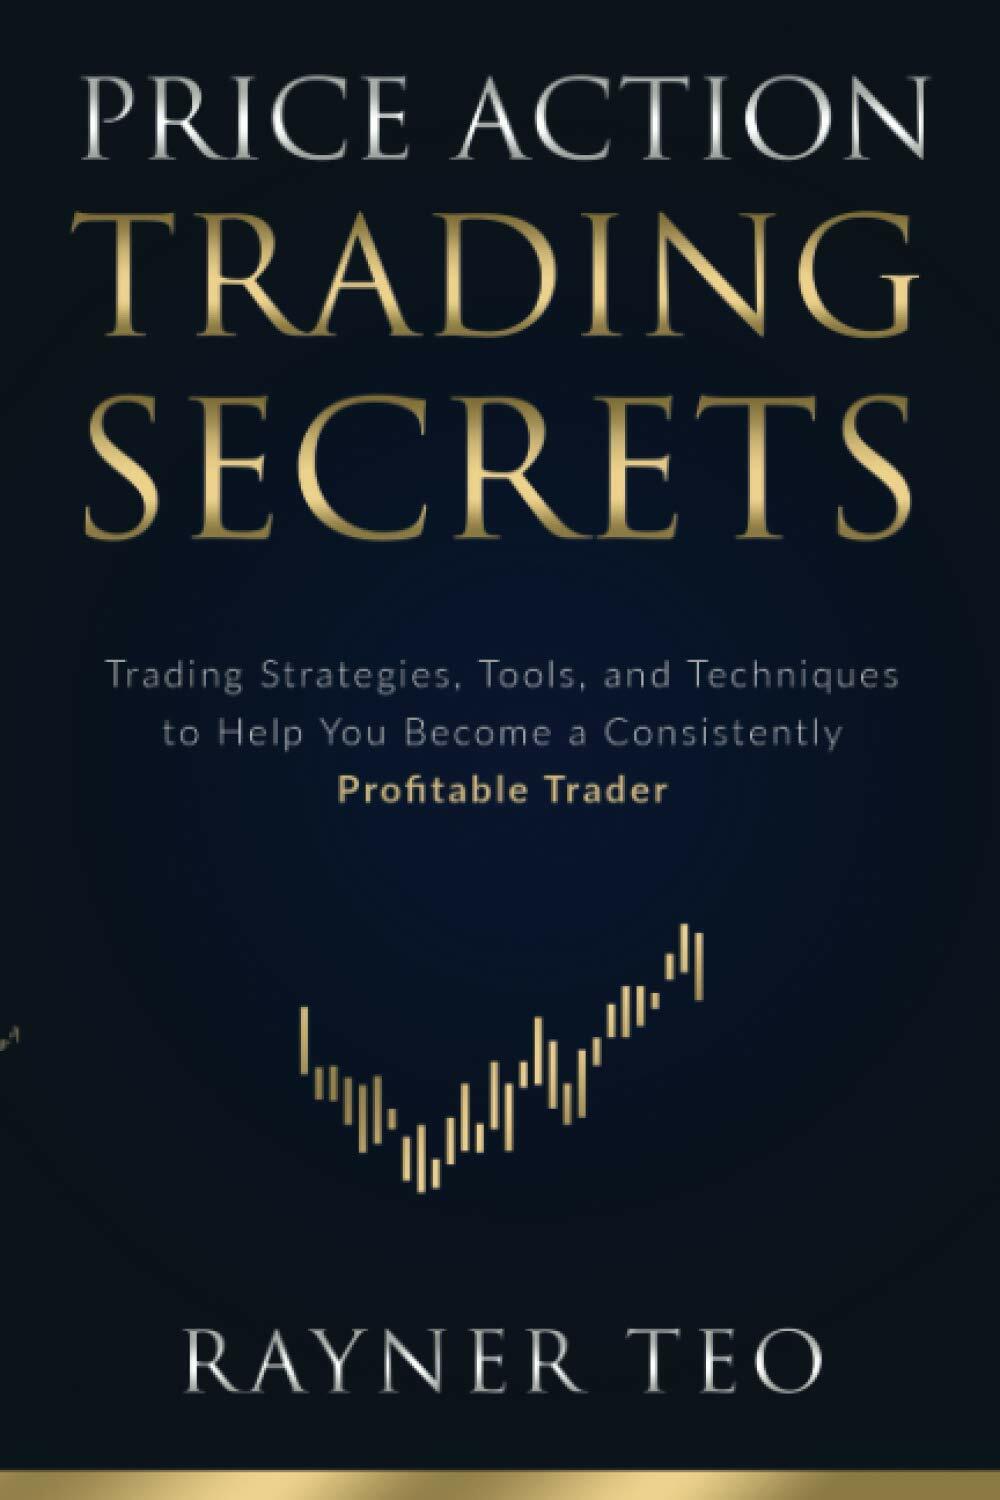 Price Action Trading Secrets: Trading Strategies, Tools, and Techniques to Help You Become a Consistently Profitable Trader (Paperback)